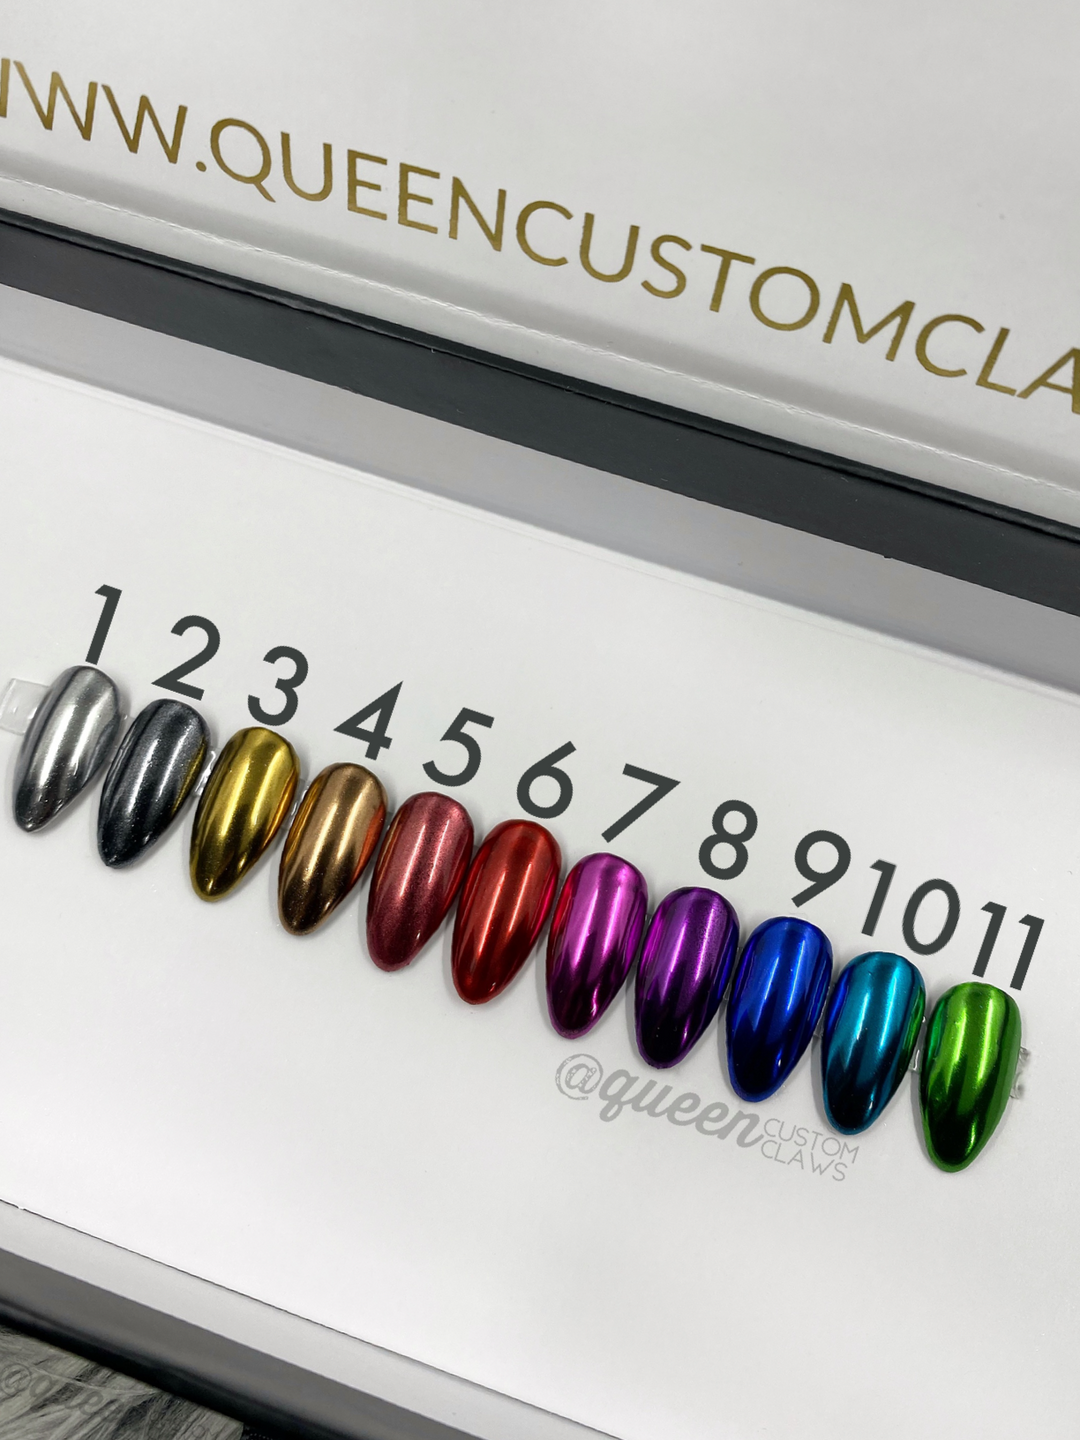 This image shows the variety of chrome colored finishes available on custom handmade press on nails. It features 11 chrome shiny chrome nail finishes. Pink chrome purple chrome blue chrome aqua teal chrome press on nails green chrome press on nails silver chrome press on nails gold chrome nails